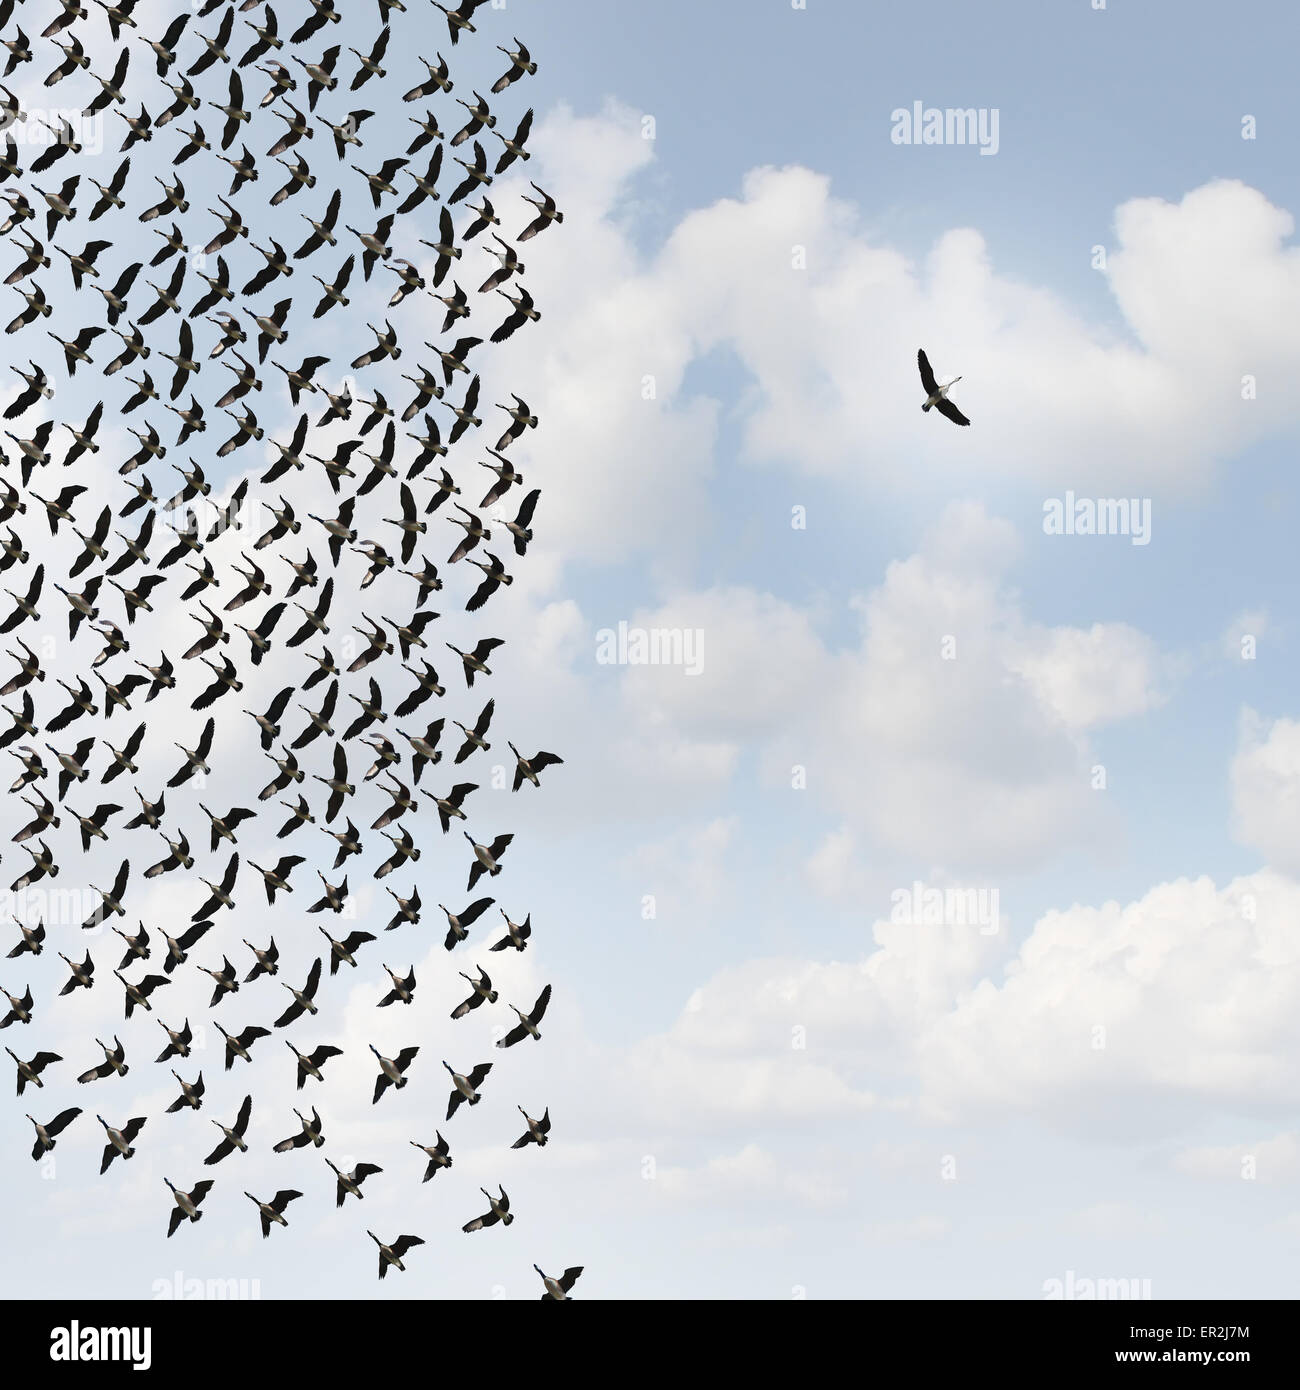 Independent thinker concept and new leadership concept or individuality as a group of flying geese with one individual bird going in the opposite direction as a business symbol for innovative thinking and as a different nonconformist maverick. Stock Photo